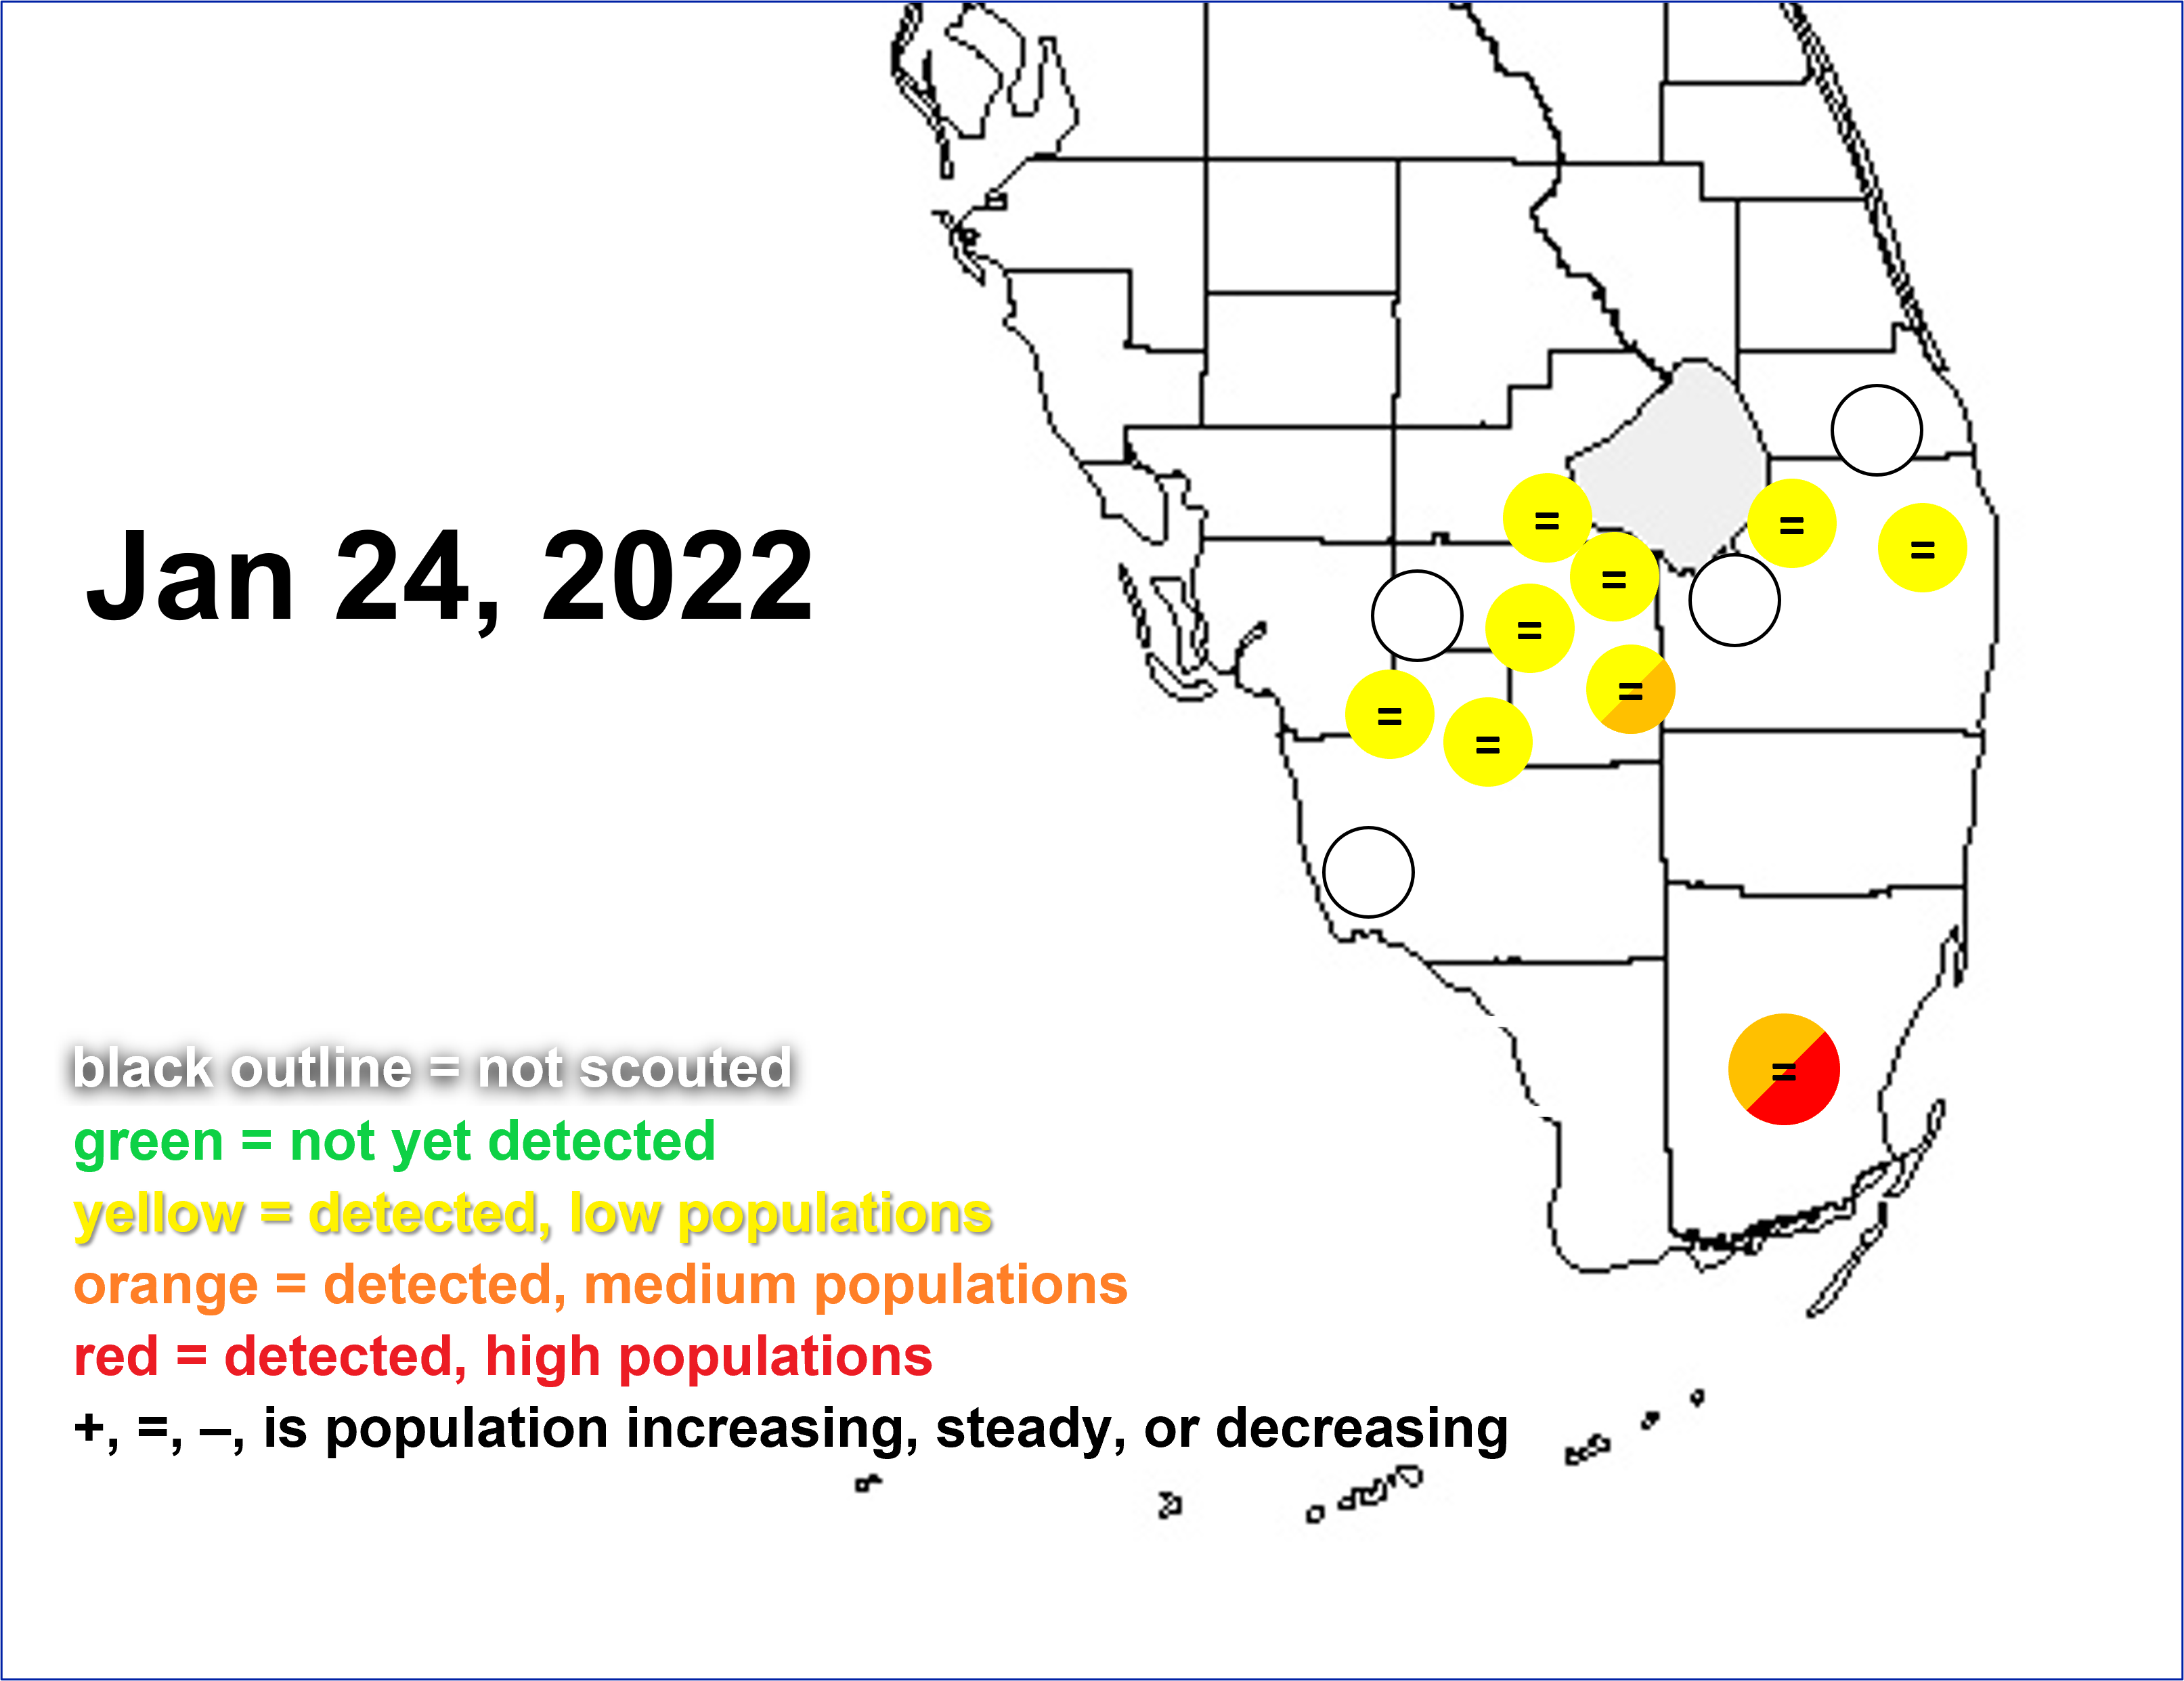 Featured image for “ABT Populations Low Across South Florida”